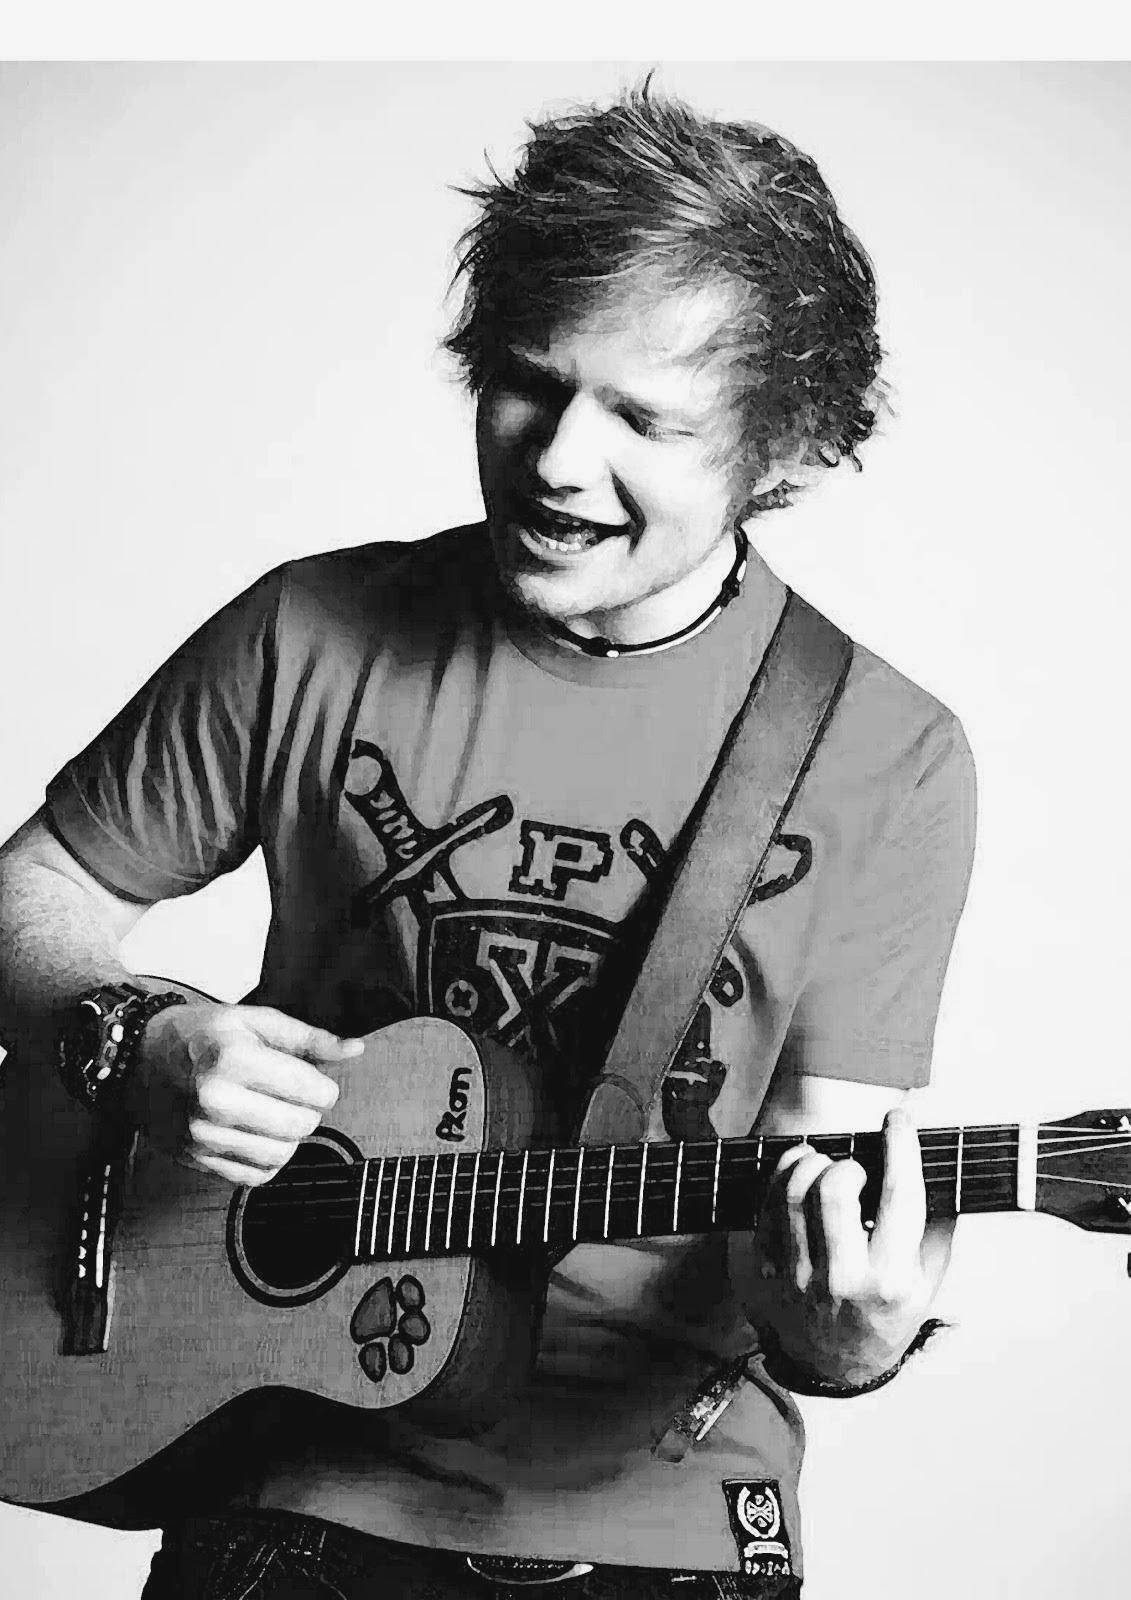 Singer-songwriter Ed Sheeran makes a statement in black and white. Wallpaper